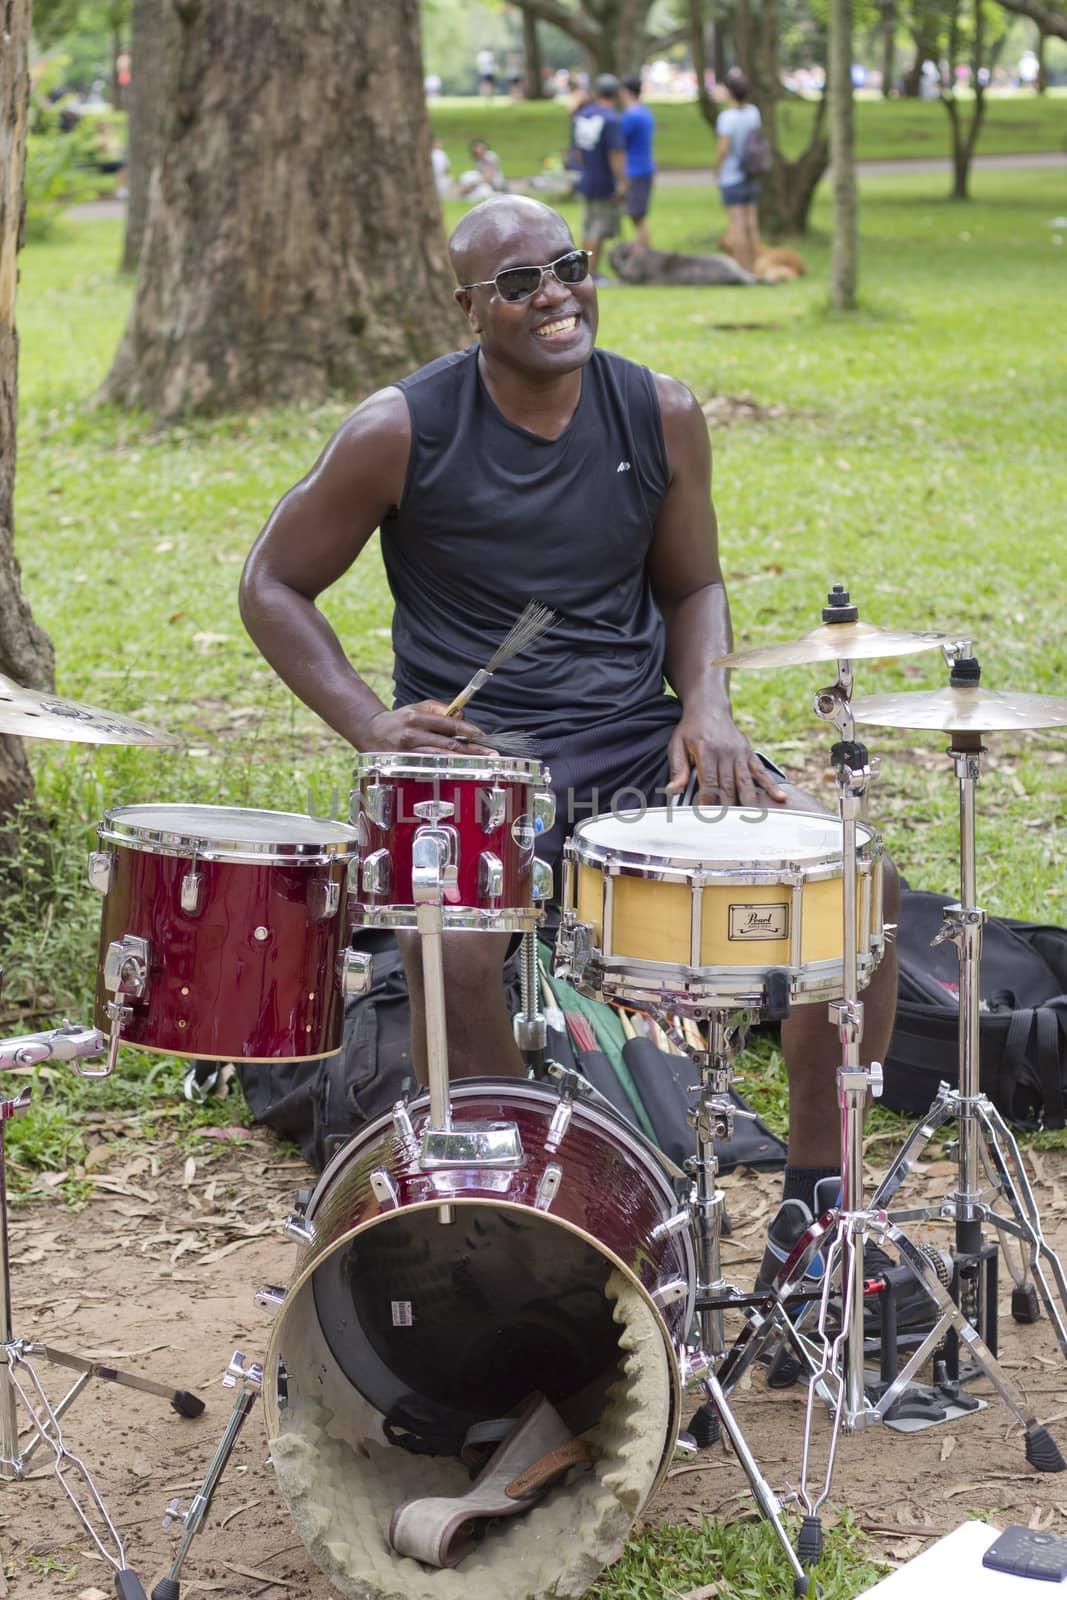 SAO PAULO, BRAZIL - FEBRUARY 01, 2015: An unidentified street musician singing and playing drums in the Ibirapuera Park at Sao Paulo Brazil.